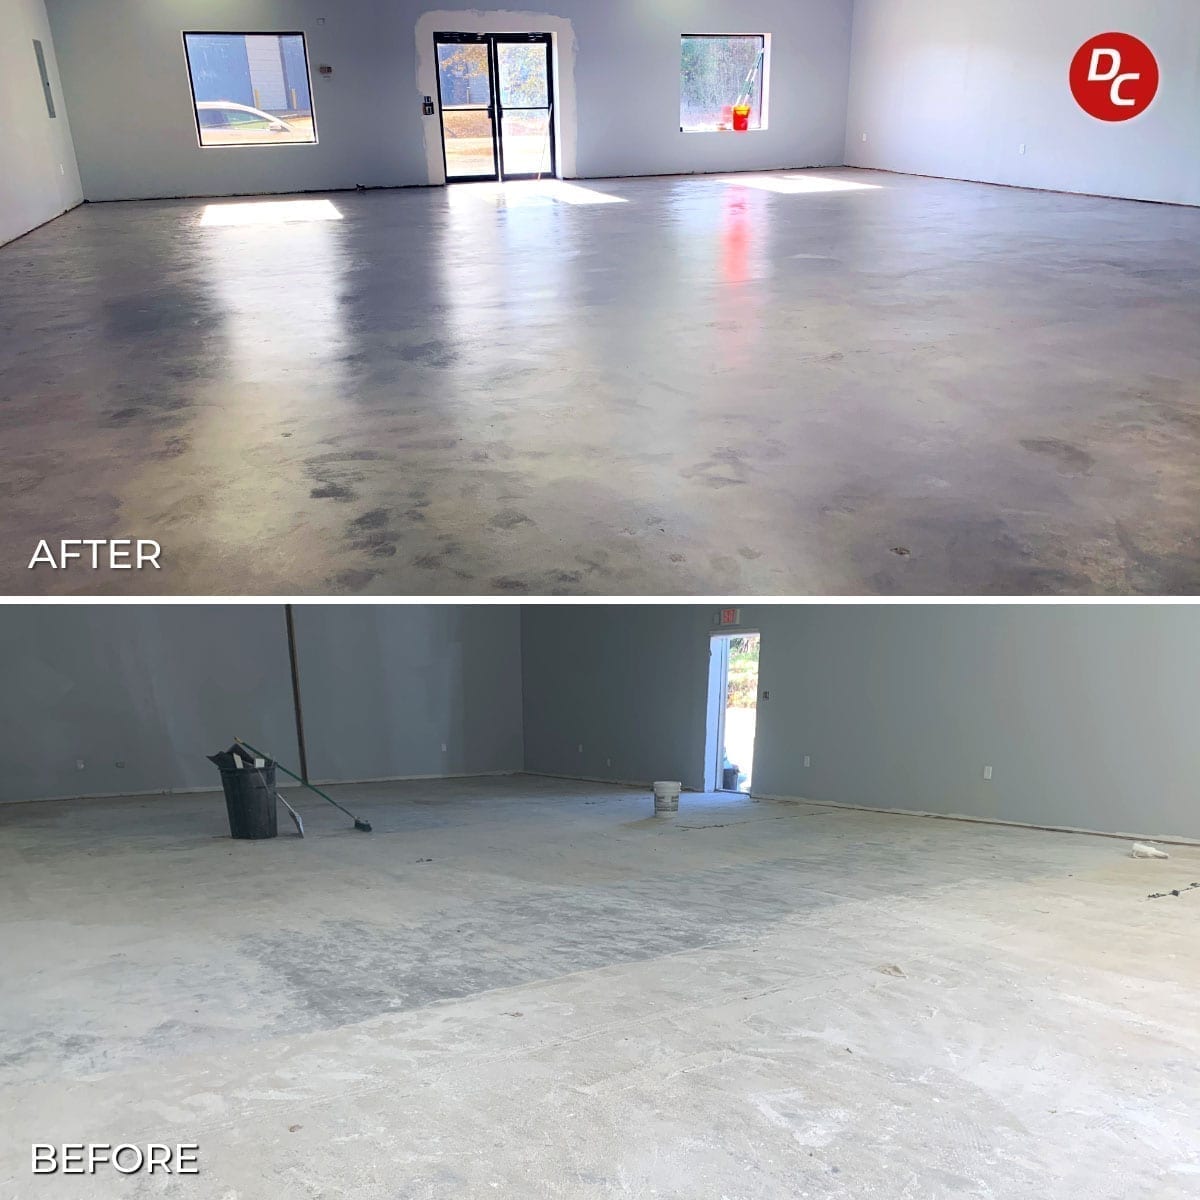 Concrete flooring in a business before and after concrete acid stain and sealer were applied.